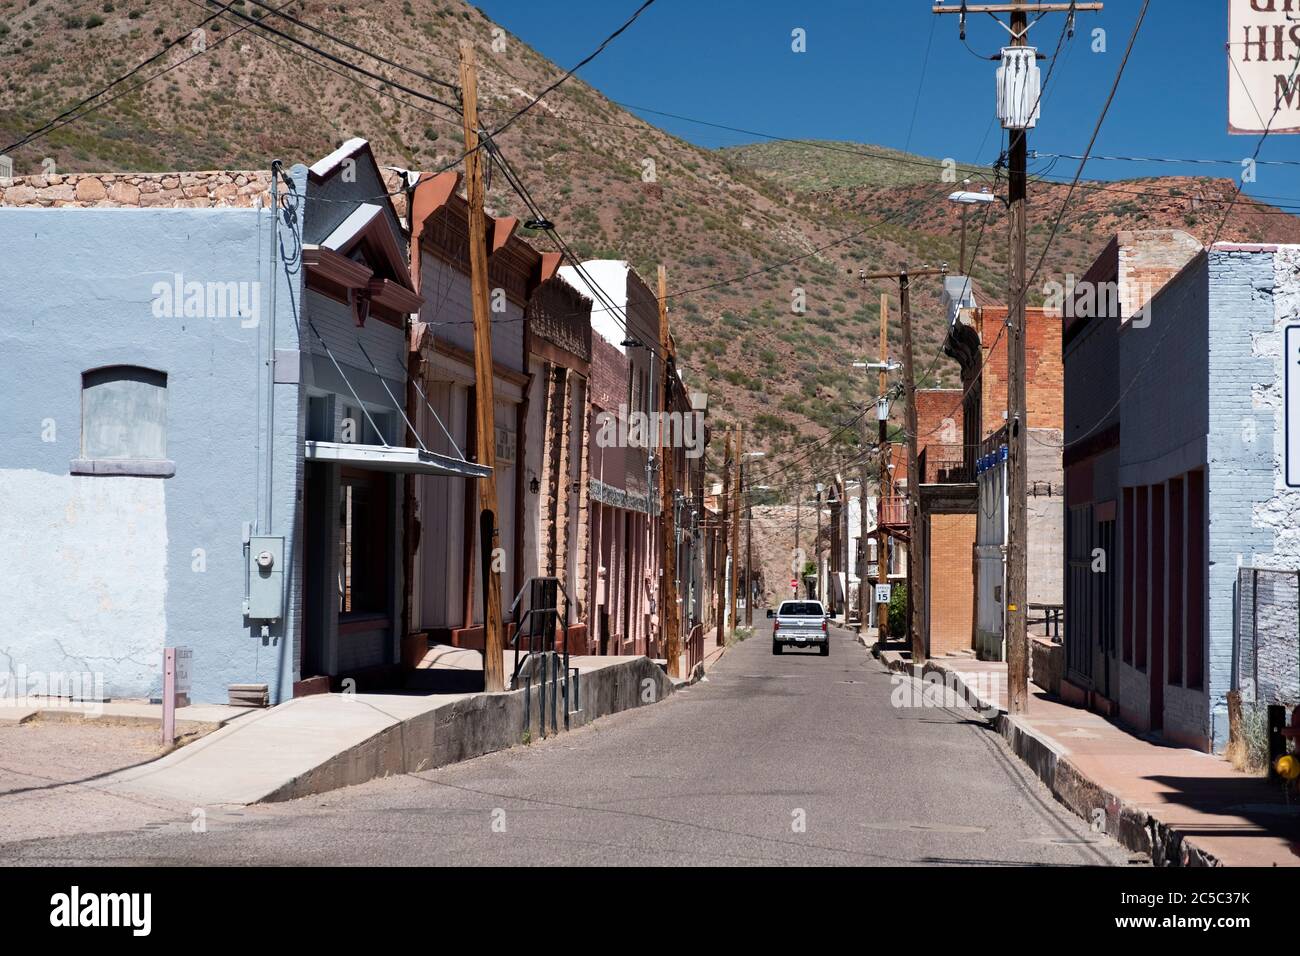 View of old Clifton, Arizona, along historic Chase Creek street, site of the original copper mining town Stock Photo